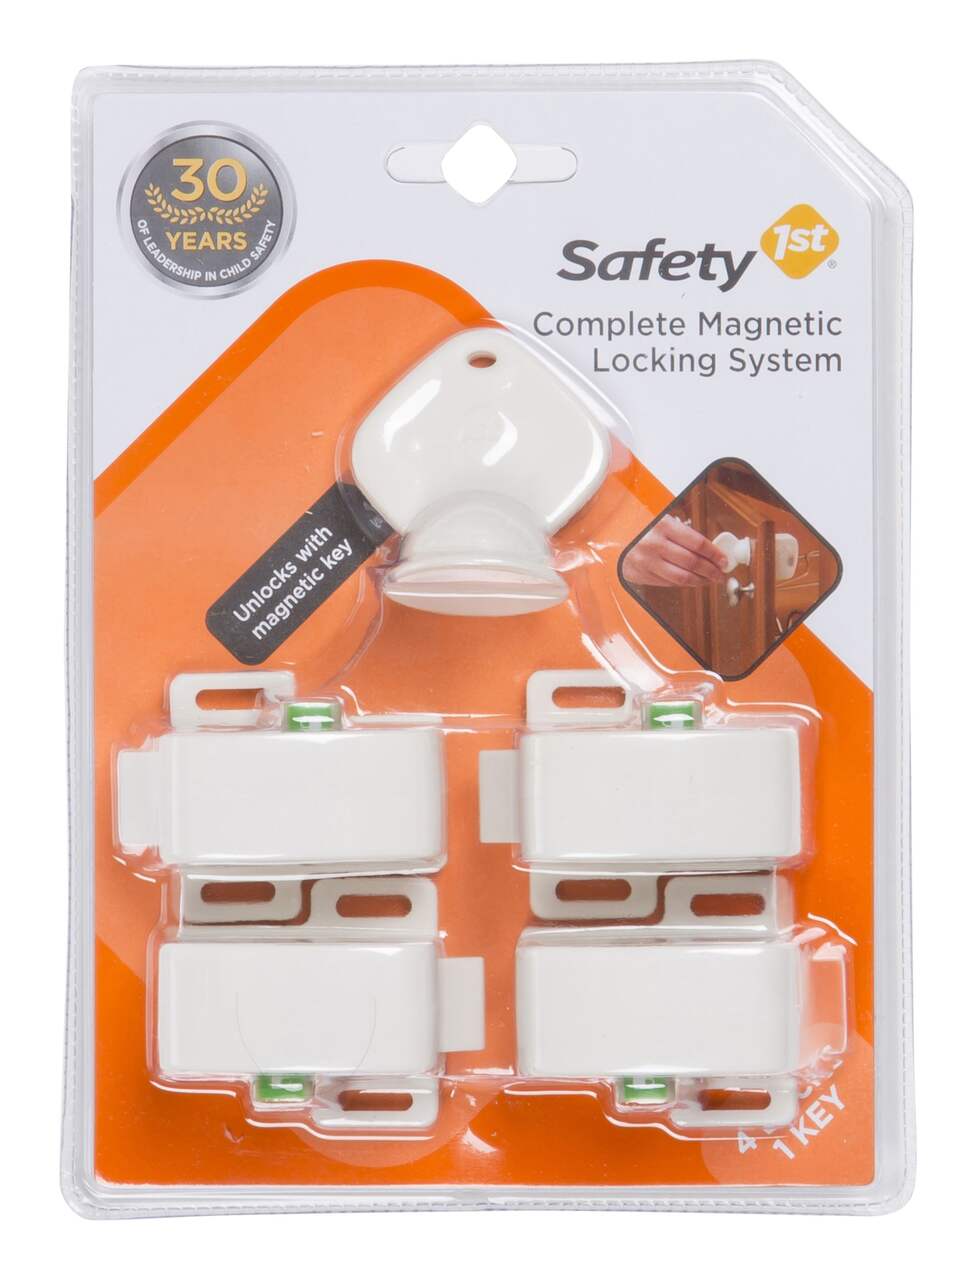 Safety 1st Adhesive Magnetic Lock System - 8 Locks and 2 Keys